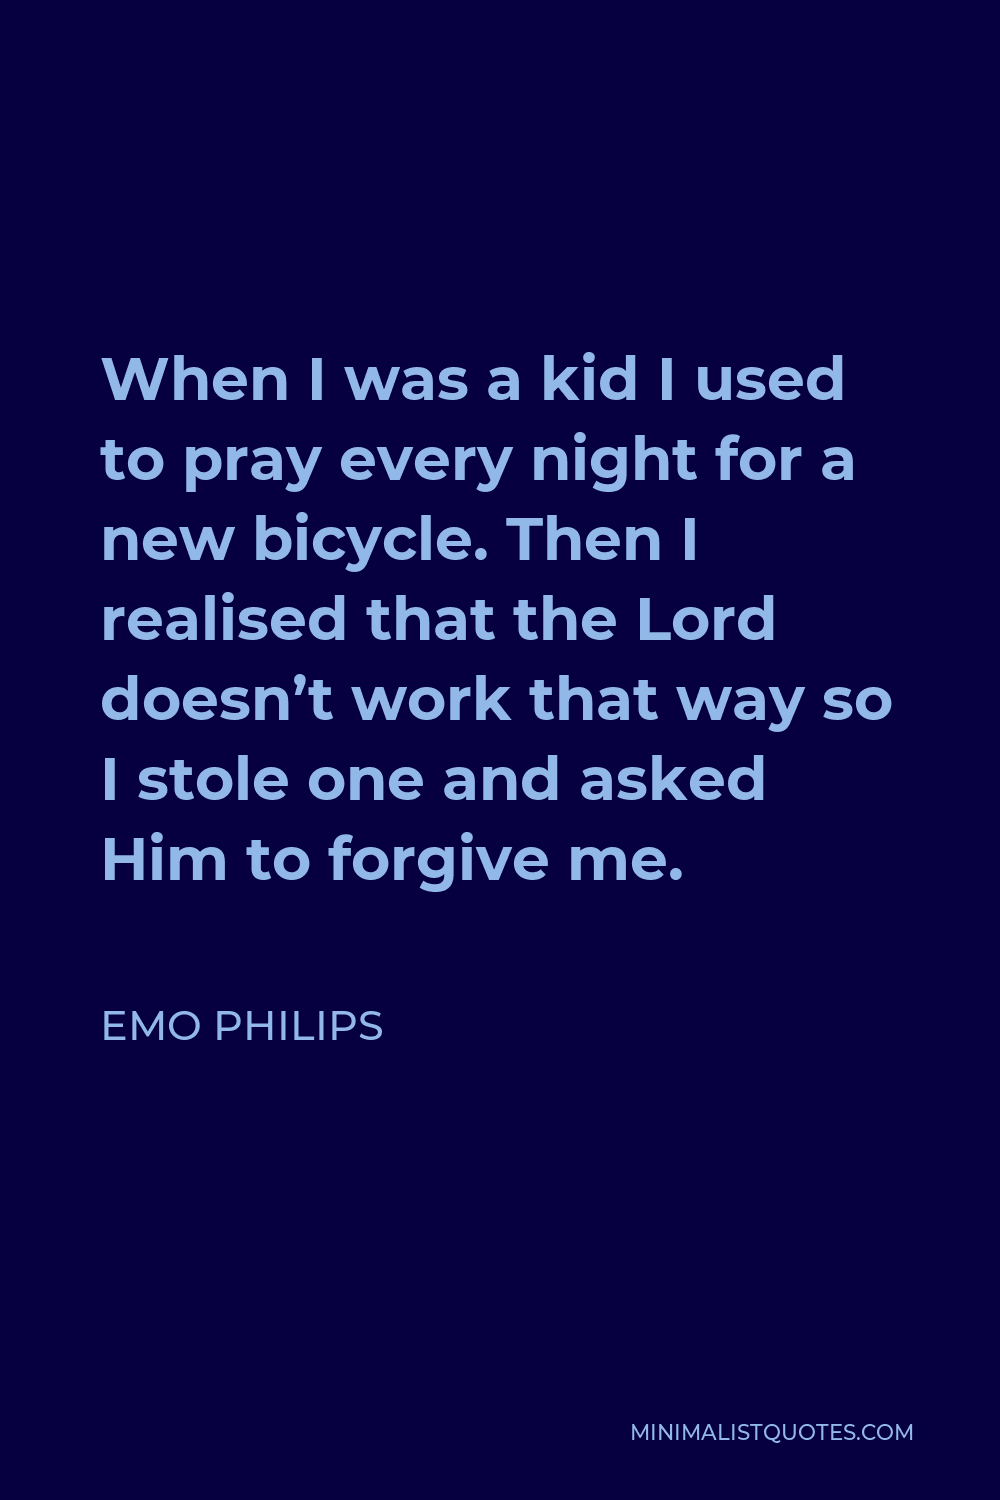 Emo Philips Quote - When I was a kid I used to pray every night for a new bicycle. Then I realised that the Lord doesn’t work that way so I stole one and asked Him to forgive me.